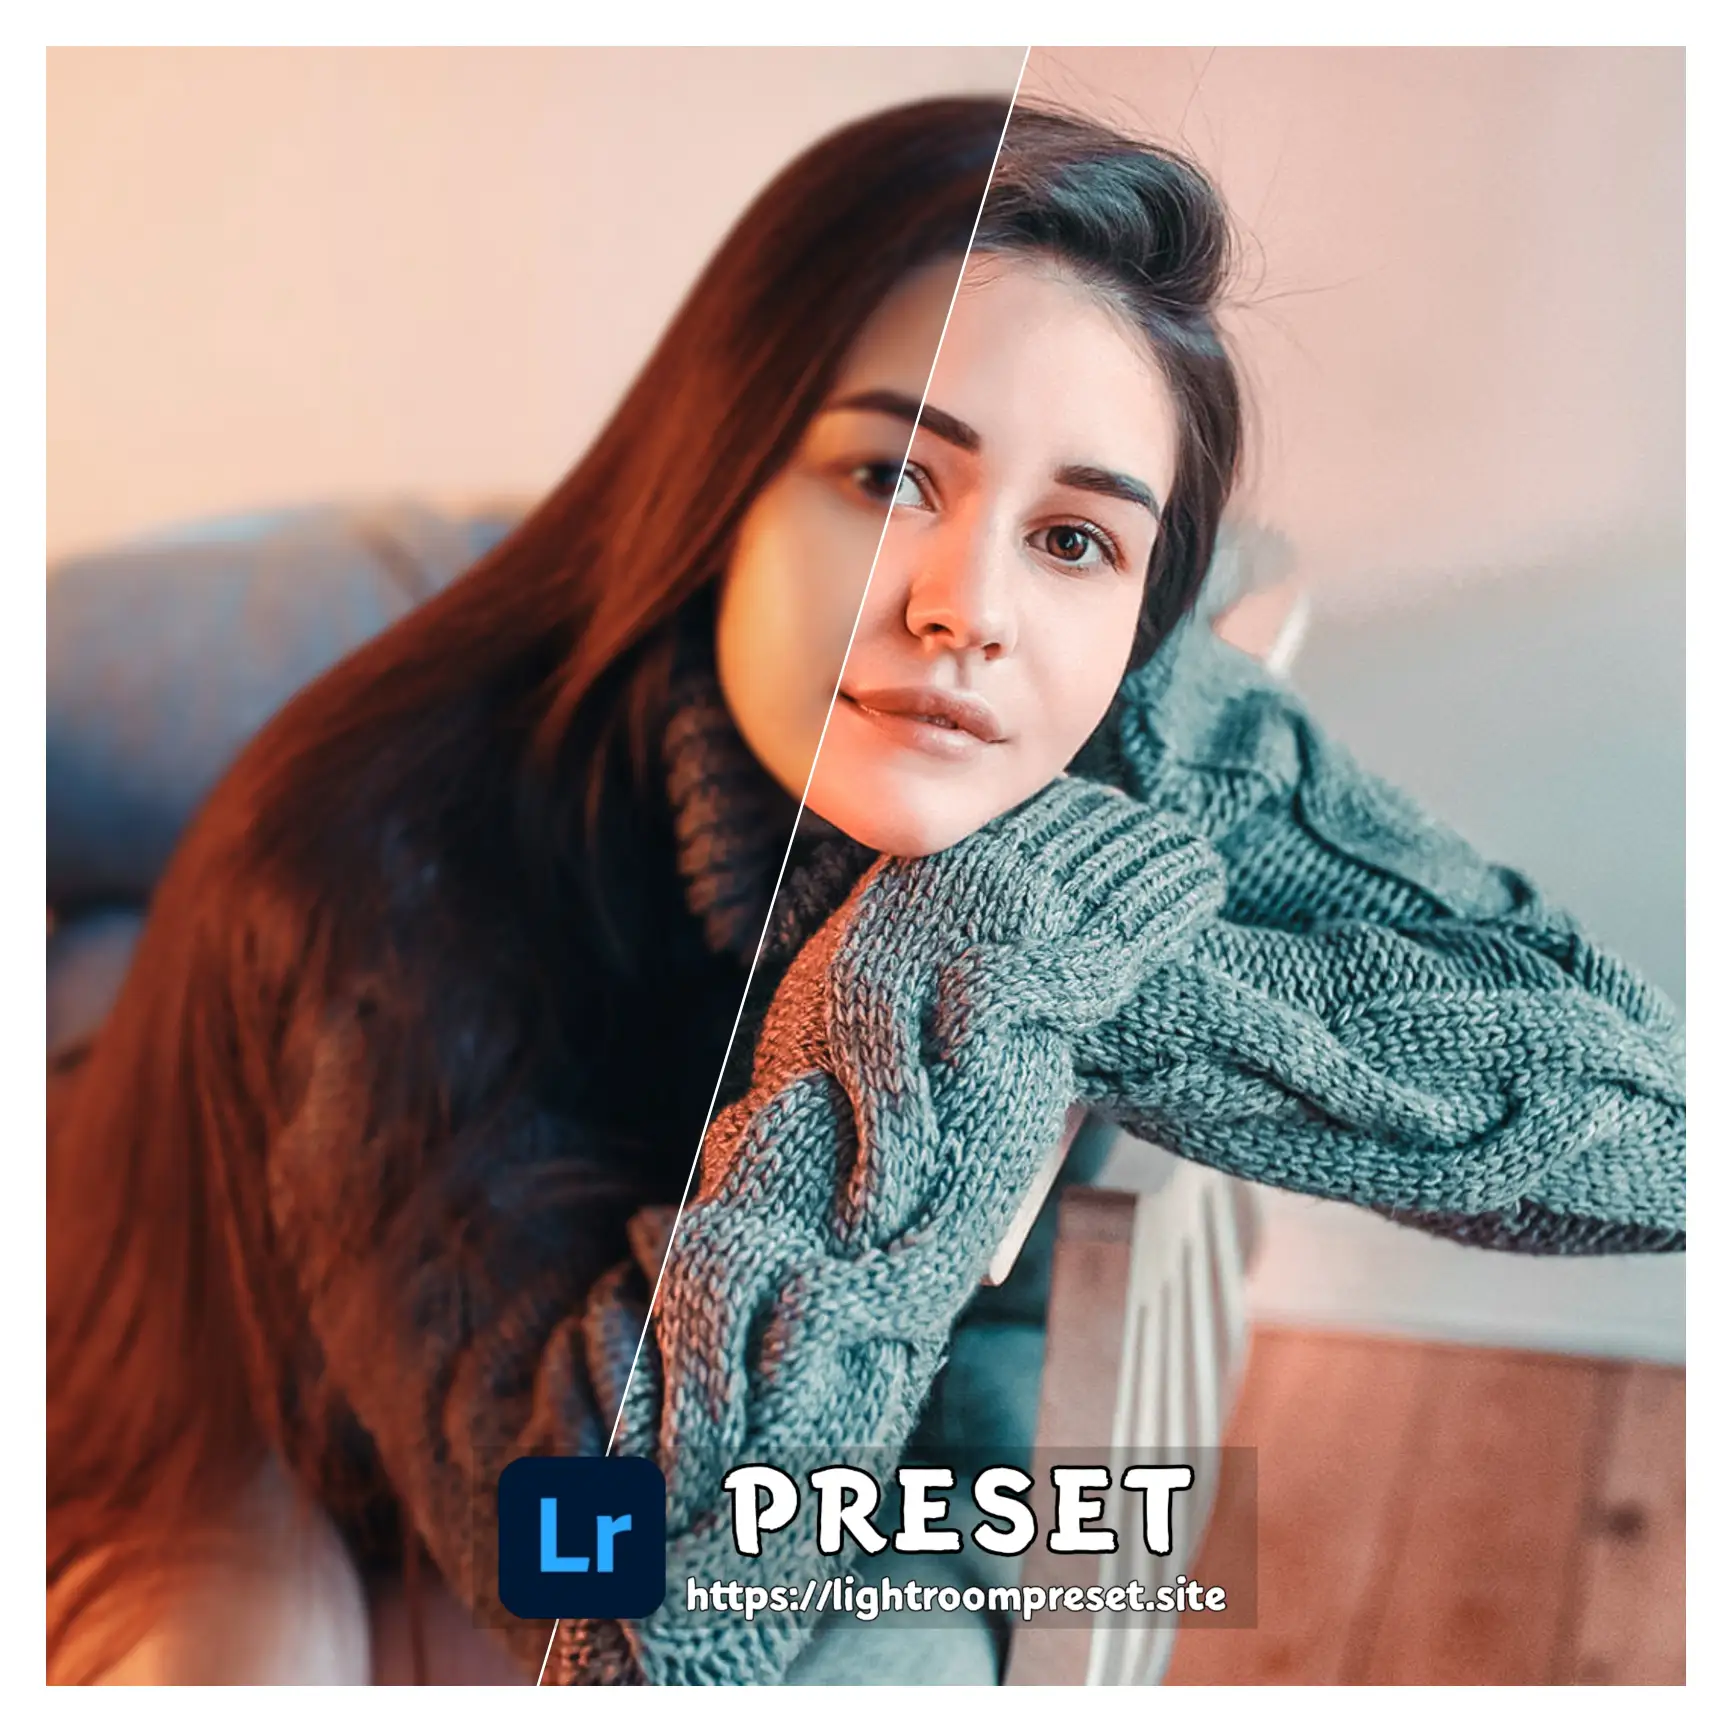 You are currently viewing nsb pictures lightroom presets download free